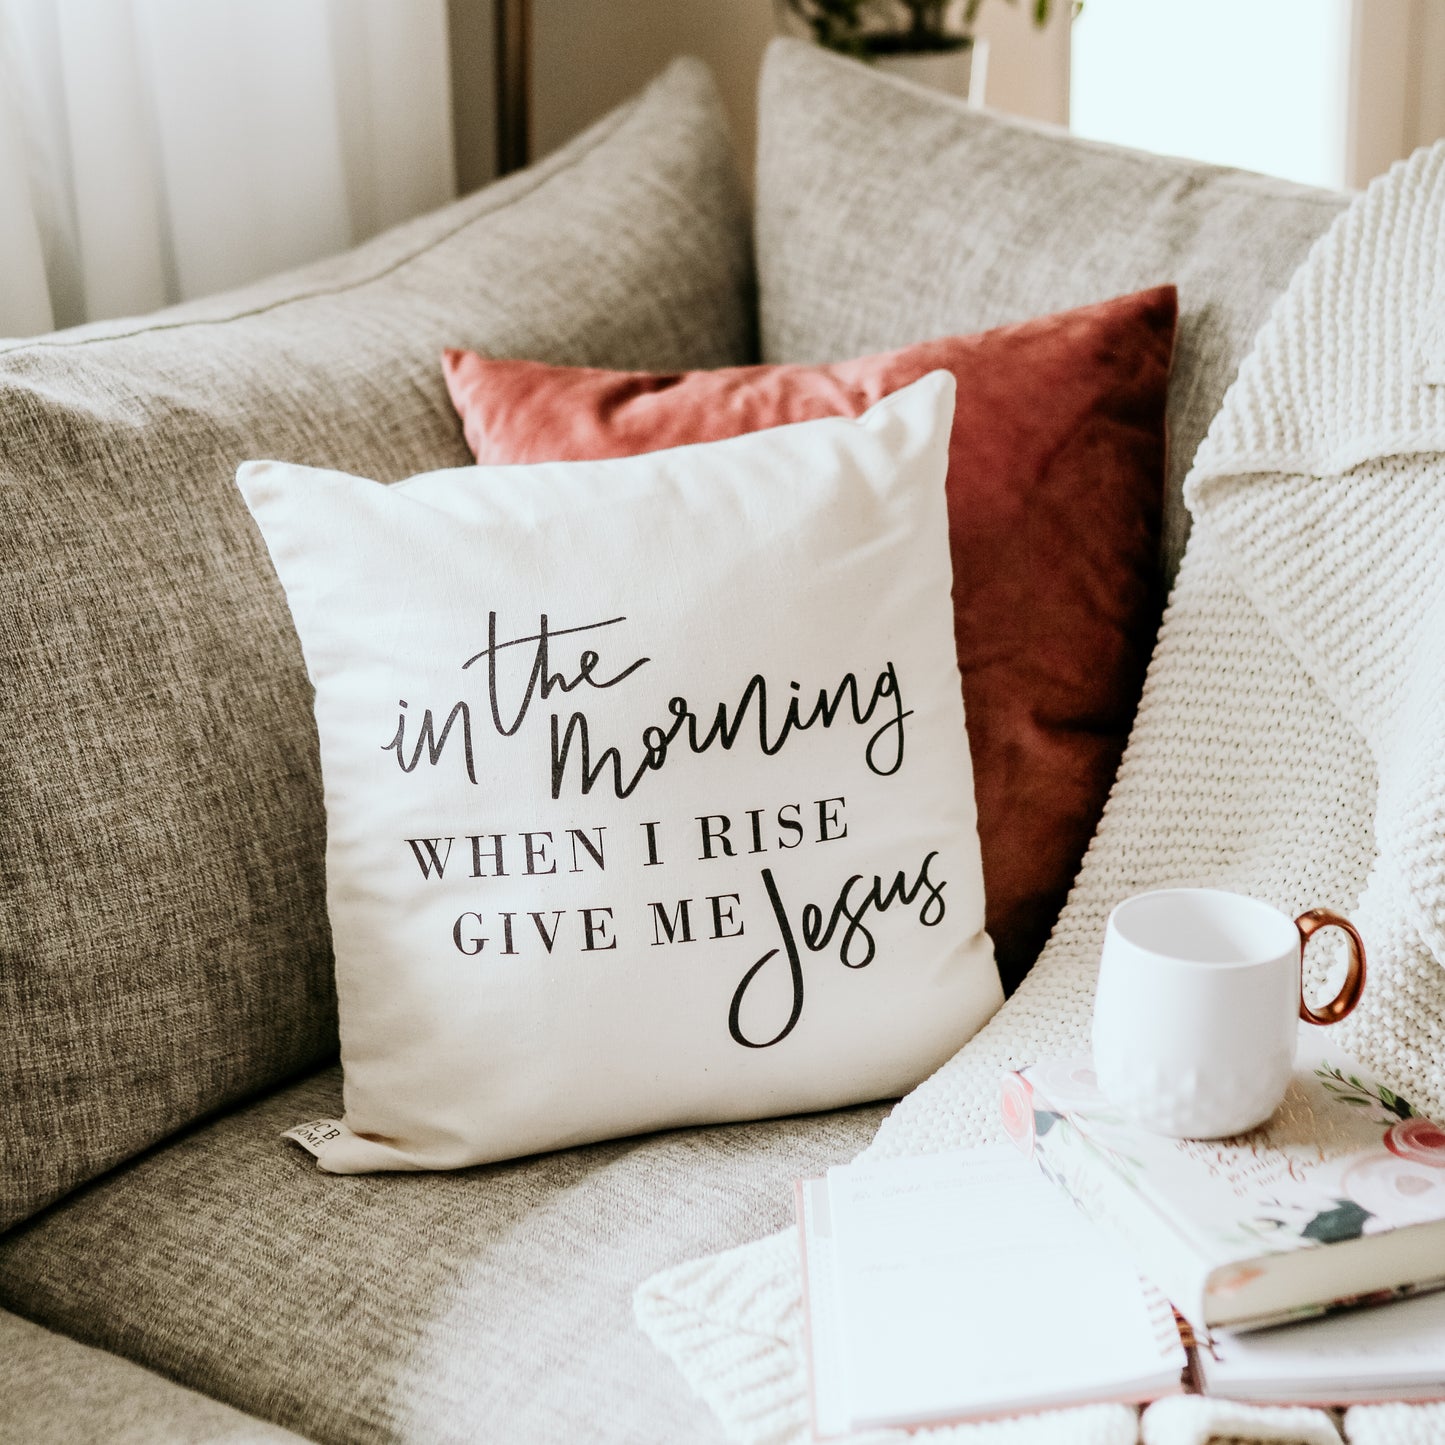 Give Me Jesus Pillow Cover